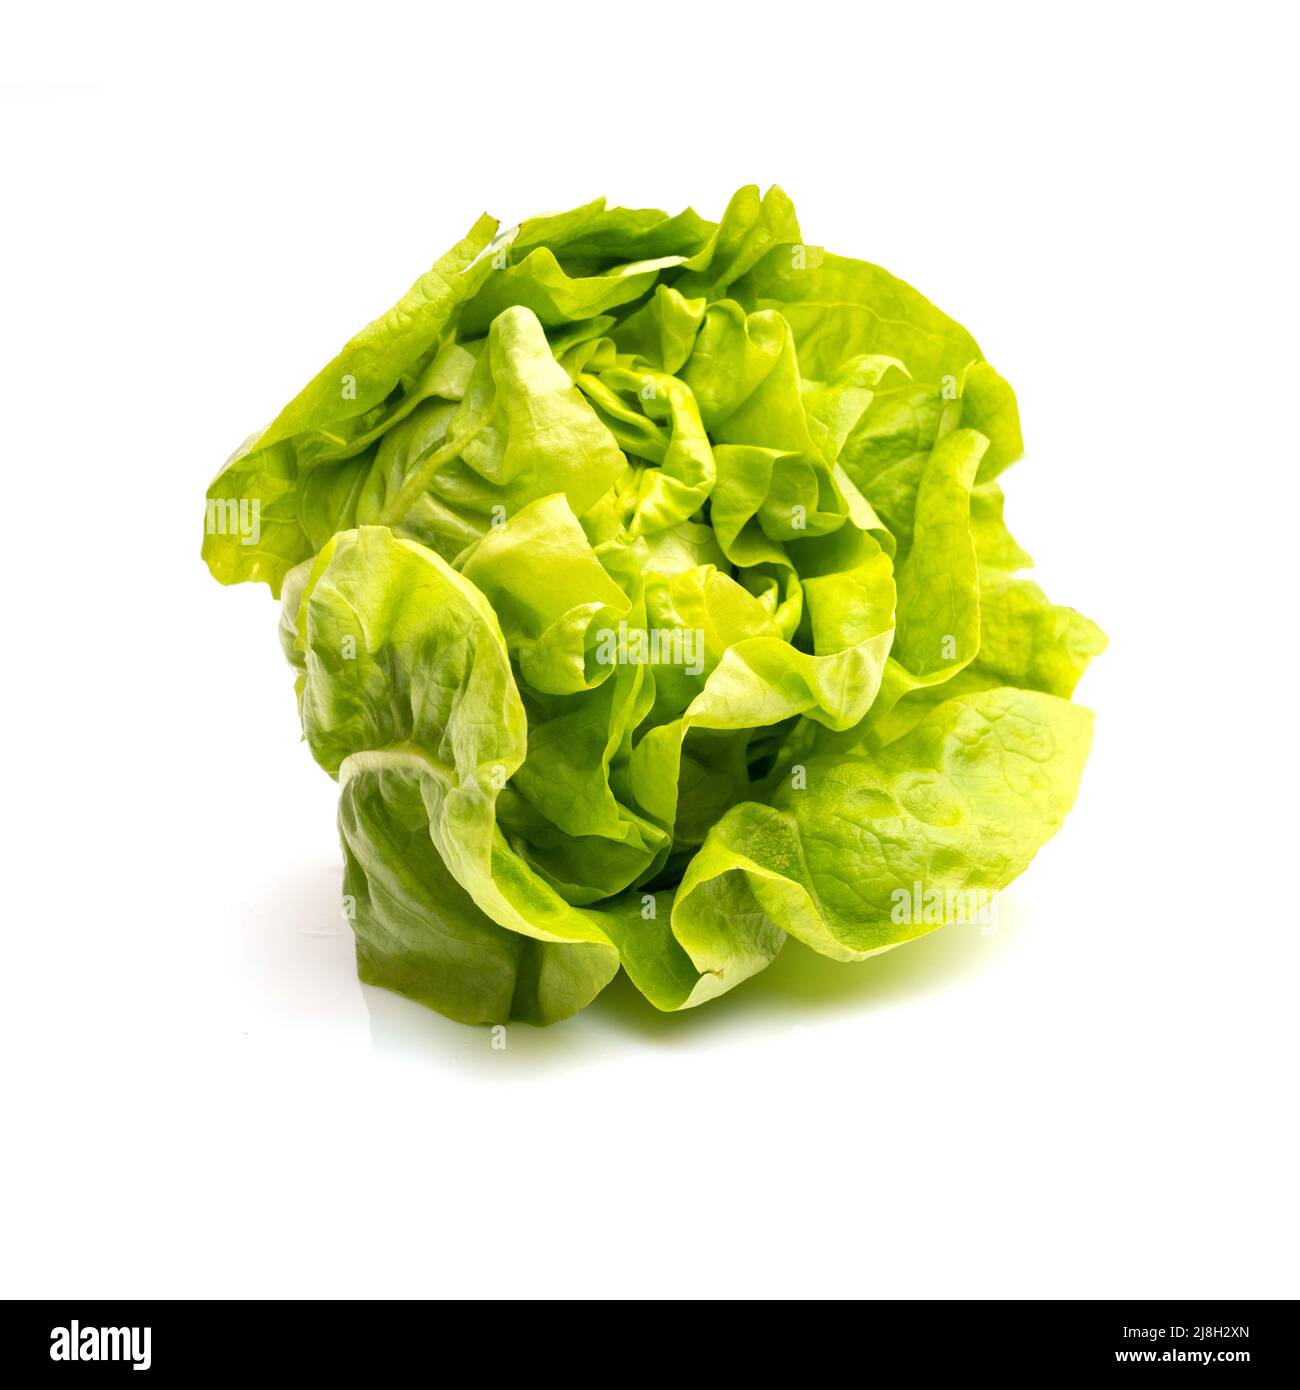 Fresh green lettuce on white background. Healthy eating concept. Vegetarian lifestyle Stock Photo